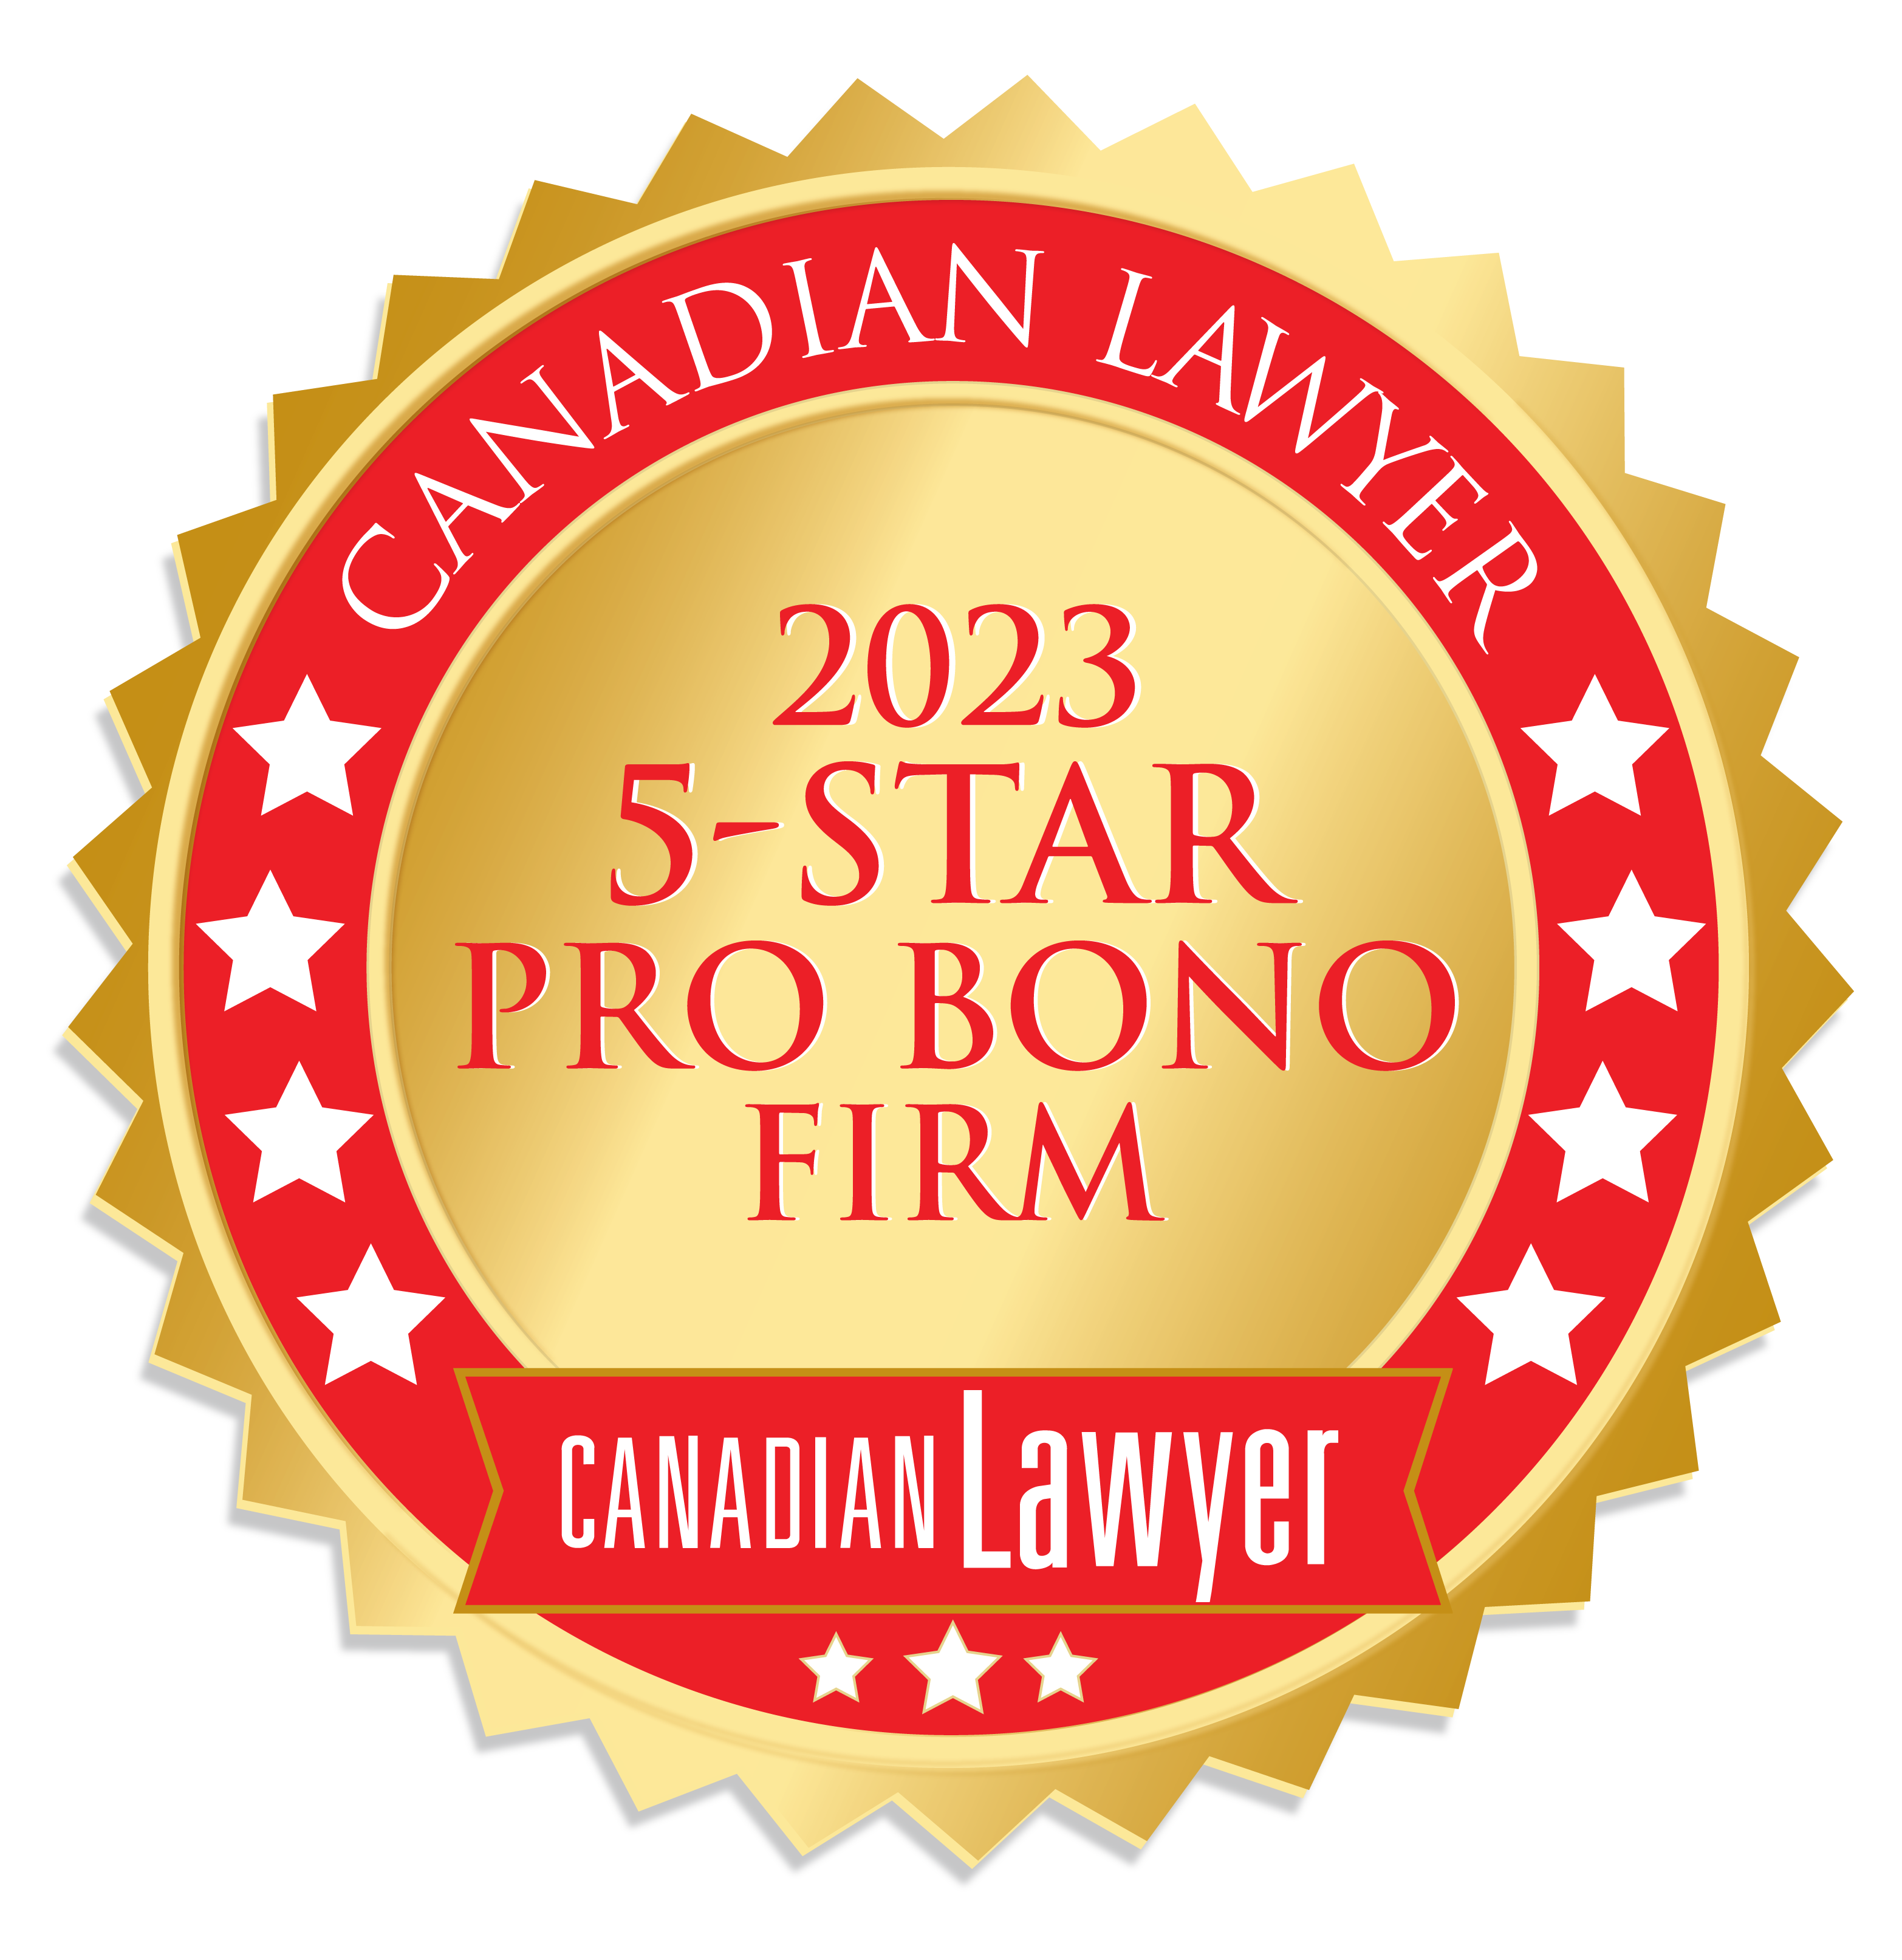 The 2023 issue of Canadian Lawyer magazine names Hunter Litigation Chambers 5 star pro bono firm.